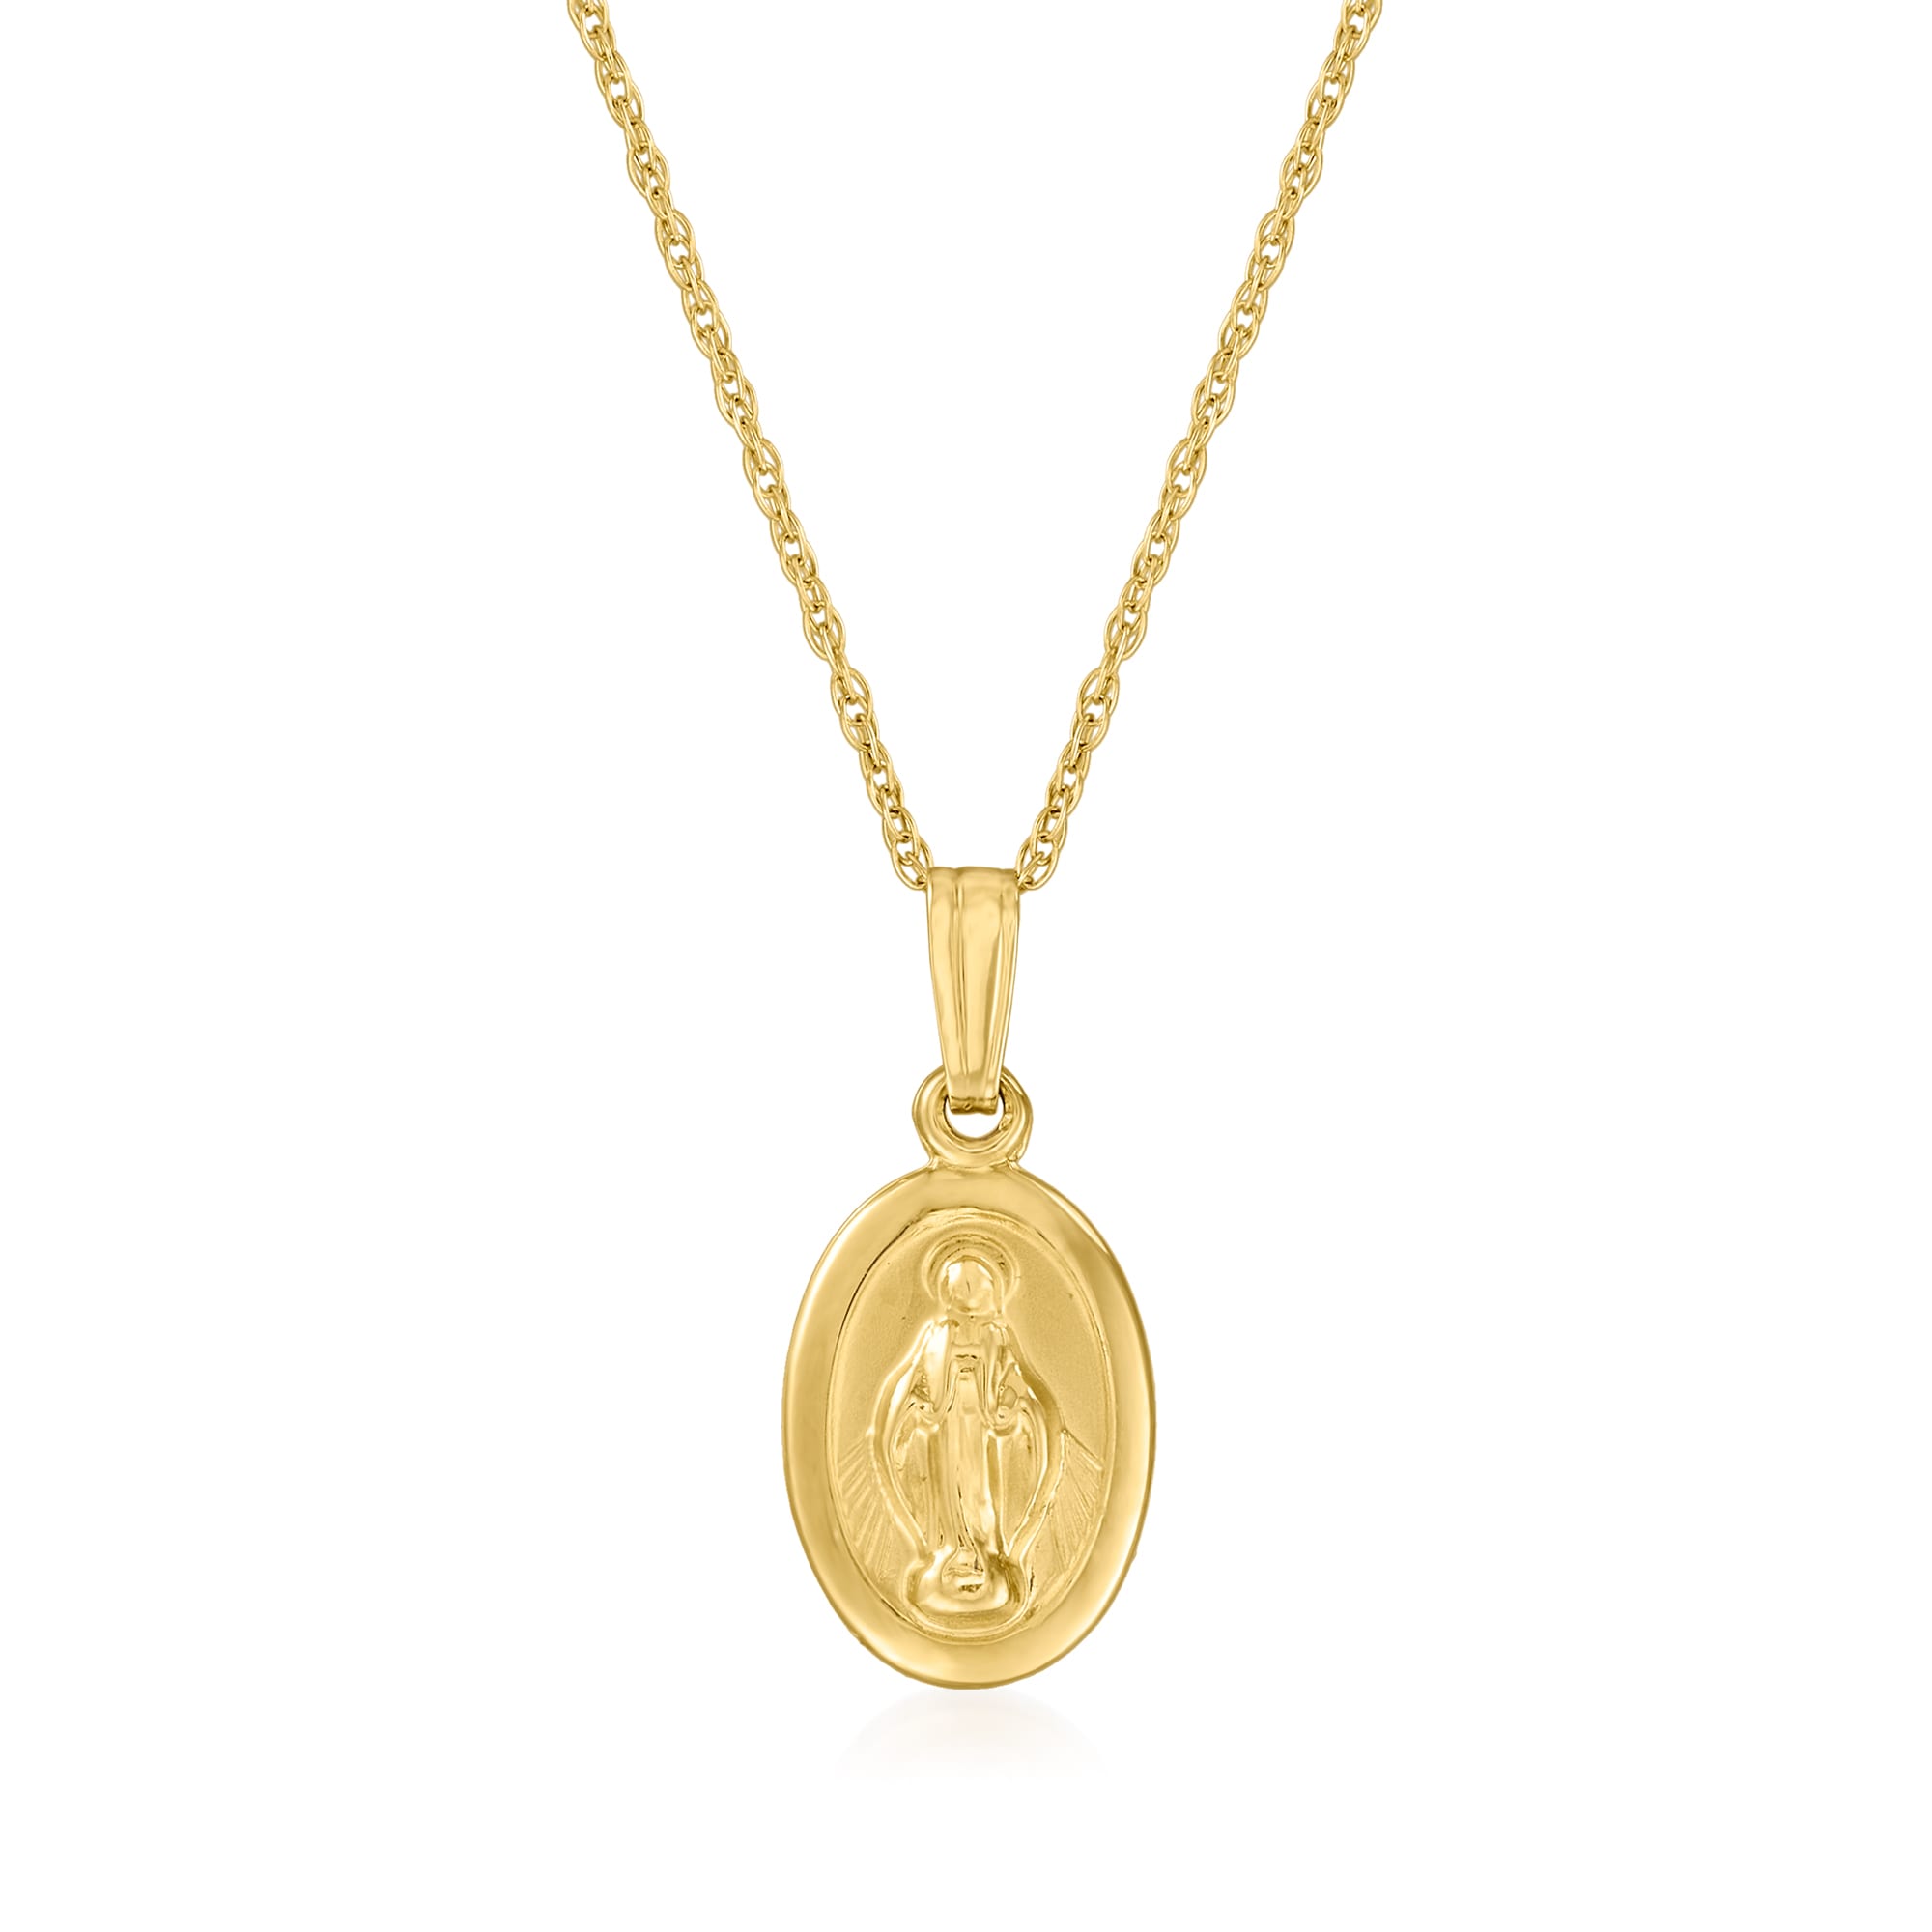 Child's 14kt Yellow Gold Miraculous Medal Necklace. 15